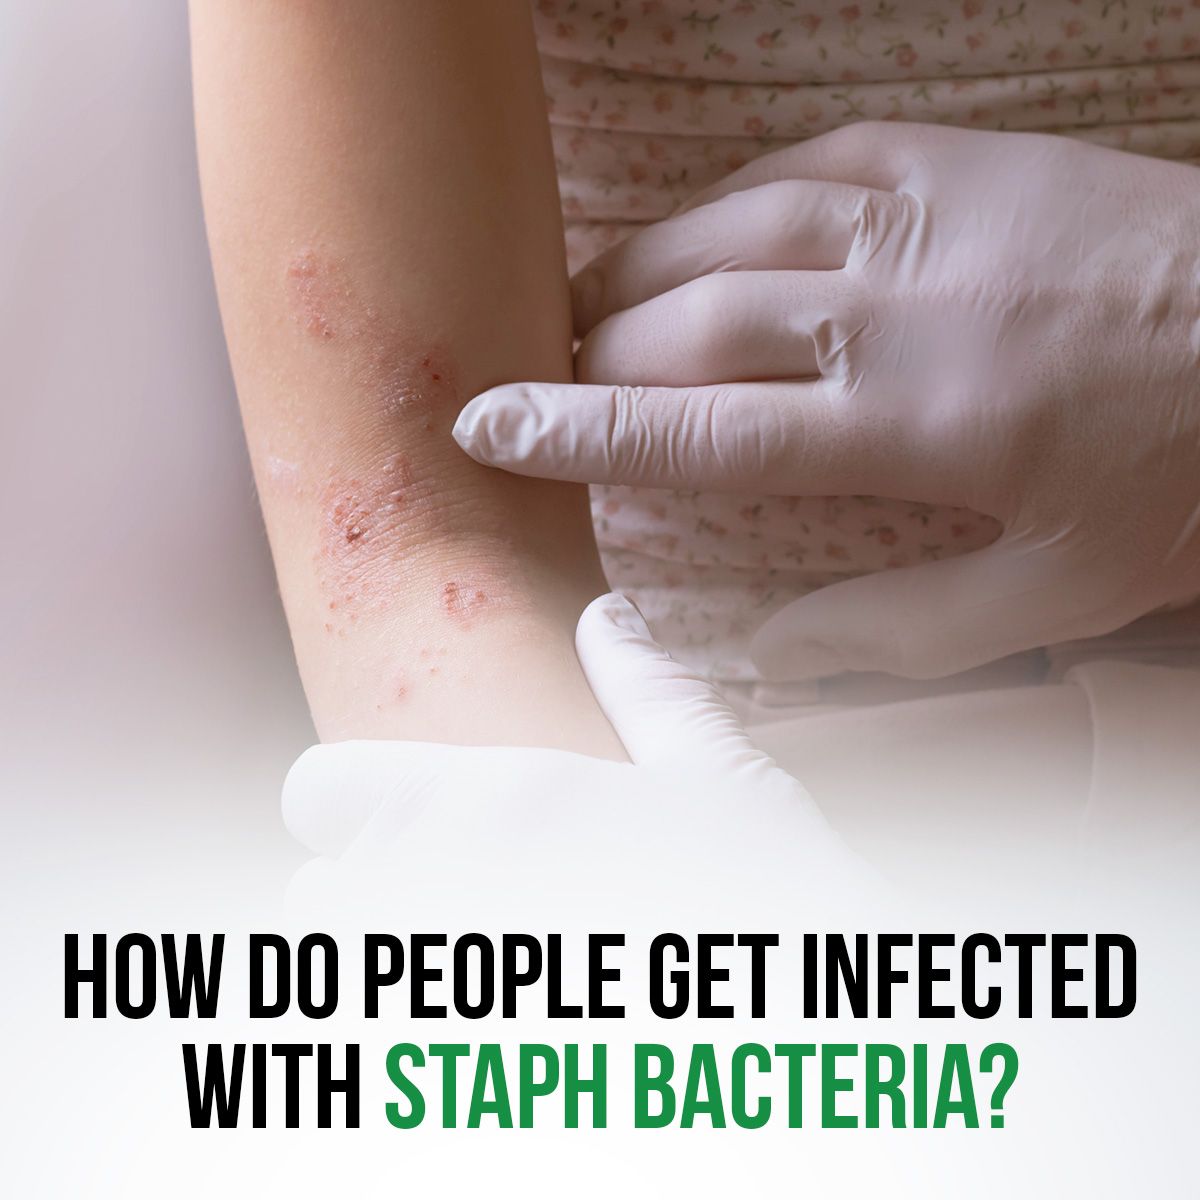 How Do People Get Infected With Staph Bacteria?